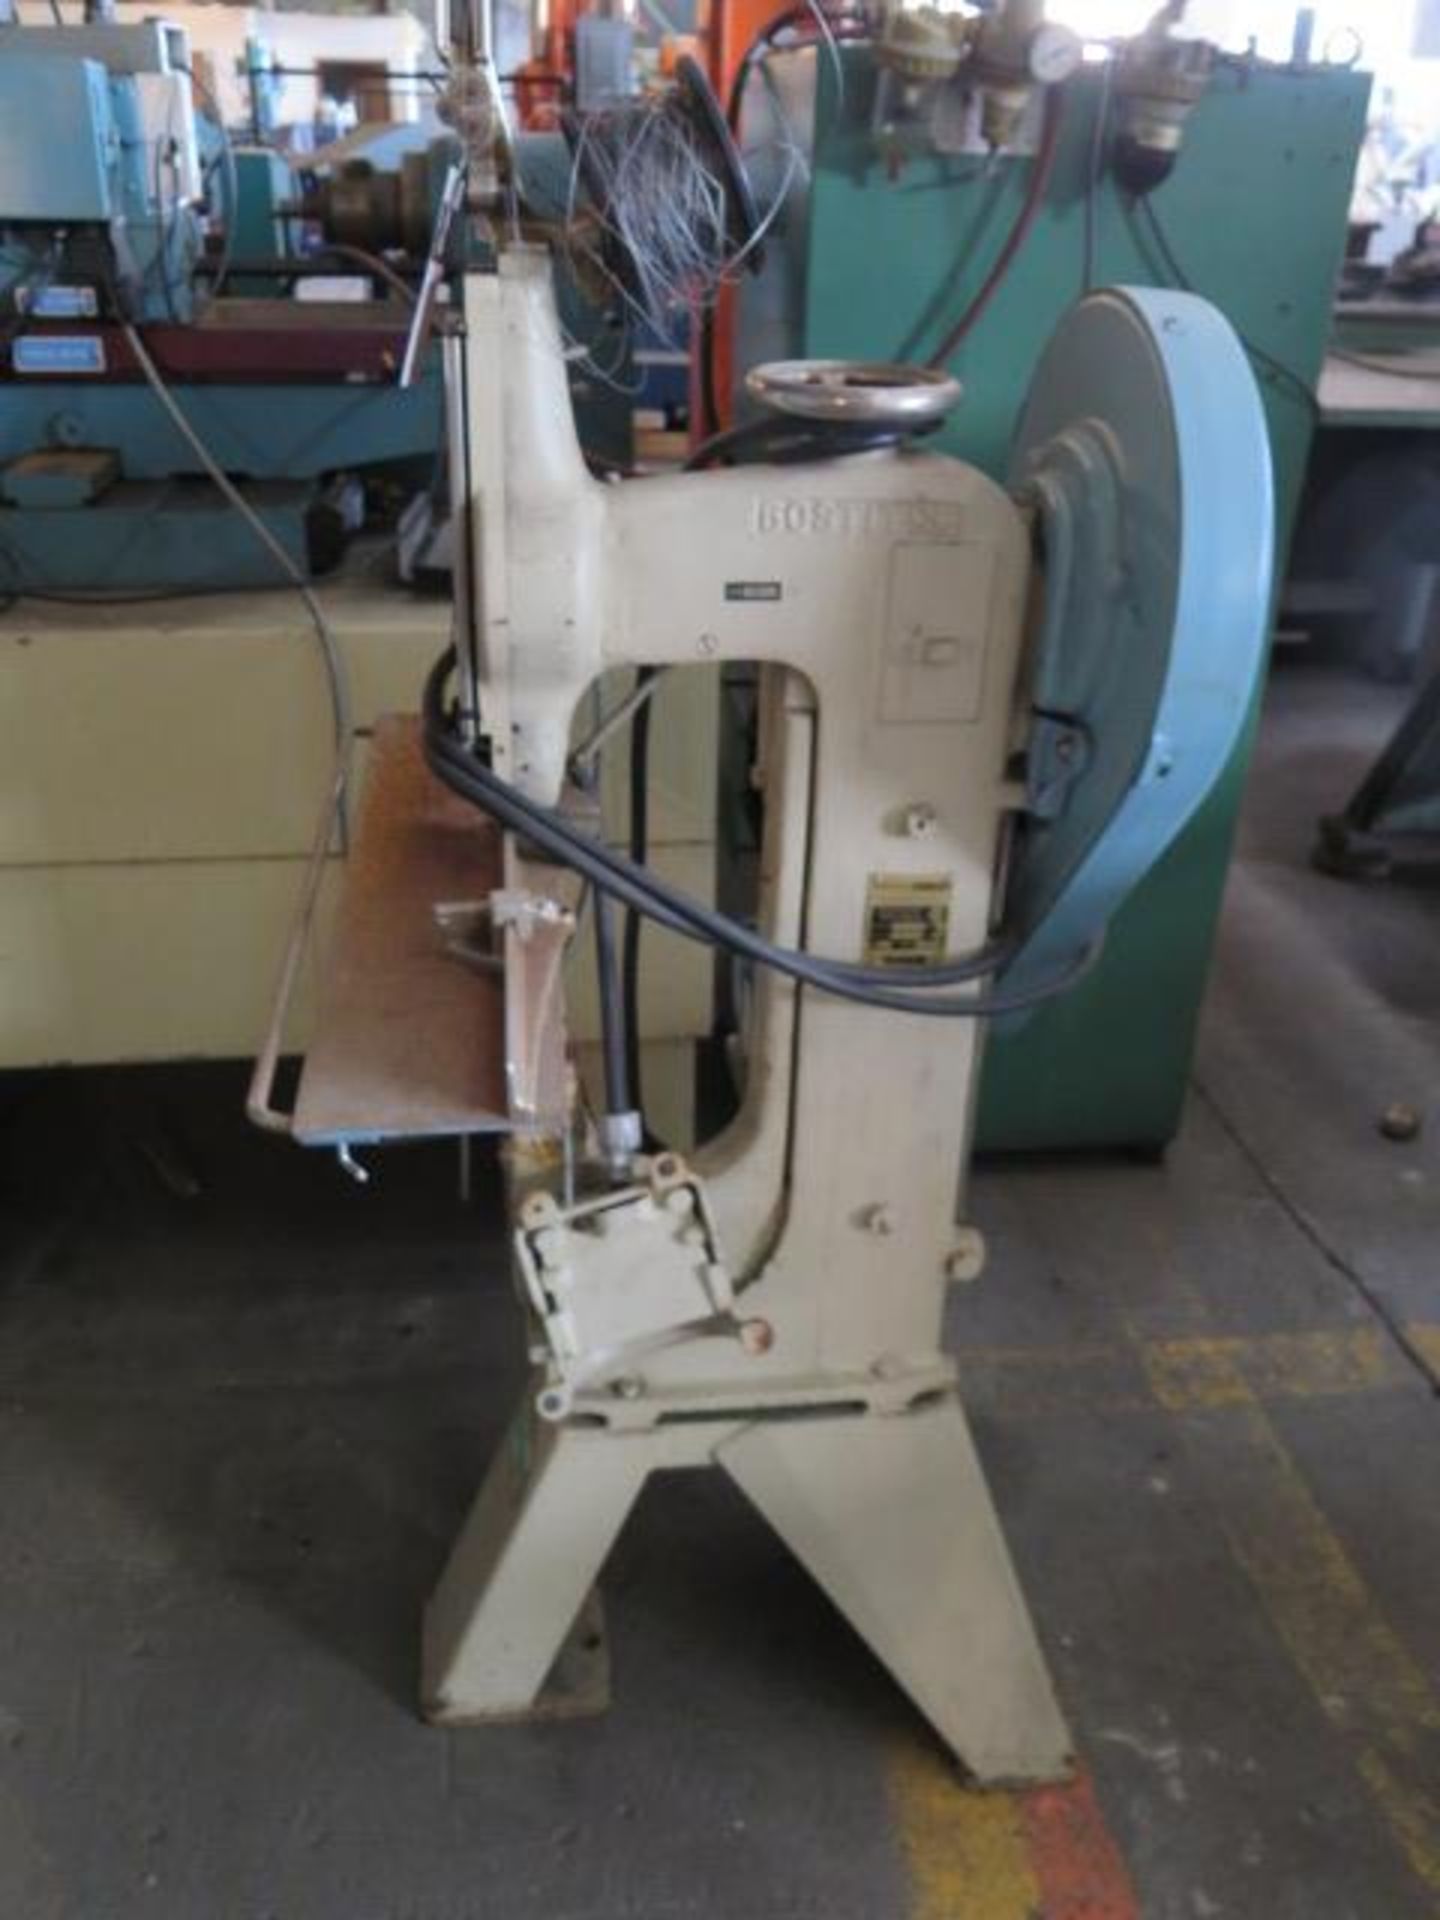 Bostitch 7AW Wire Stitcher s/n G786095 (SOLD AS-IS - NO WARRANTY) - Image 4 of 5